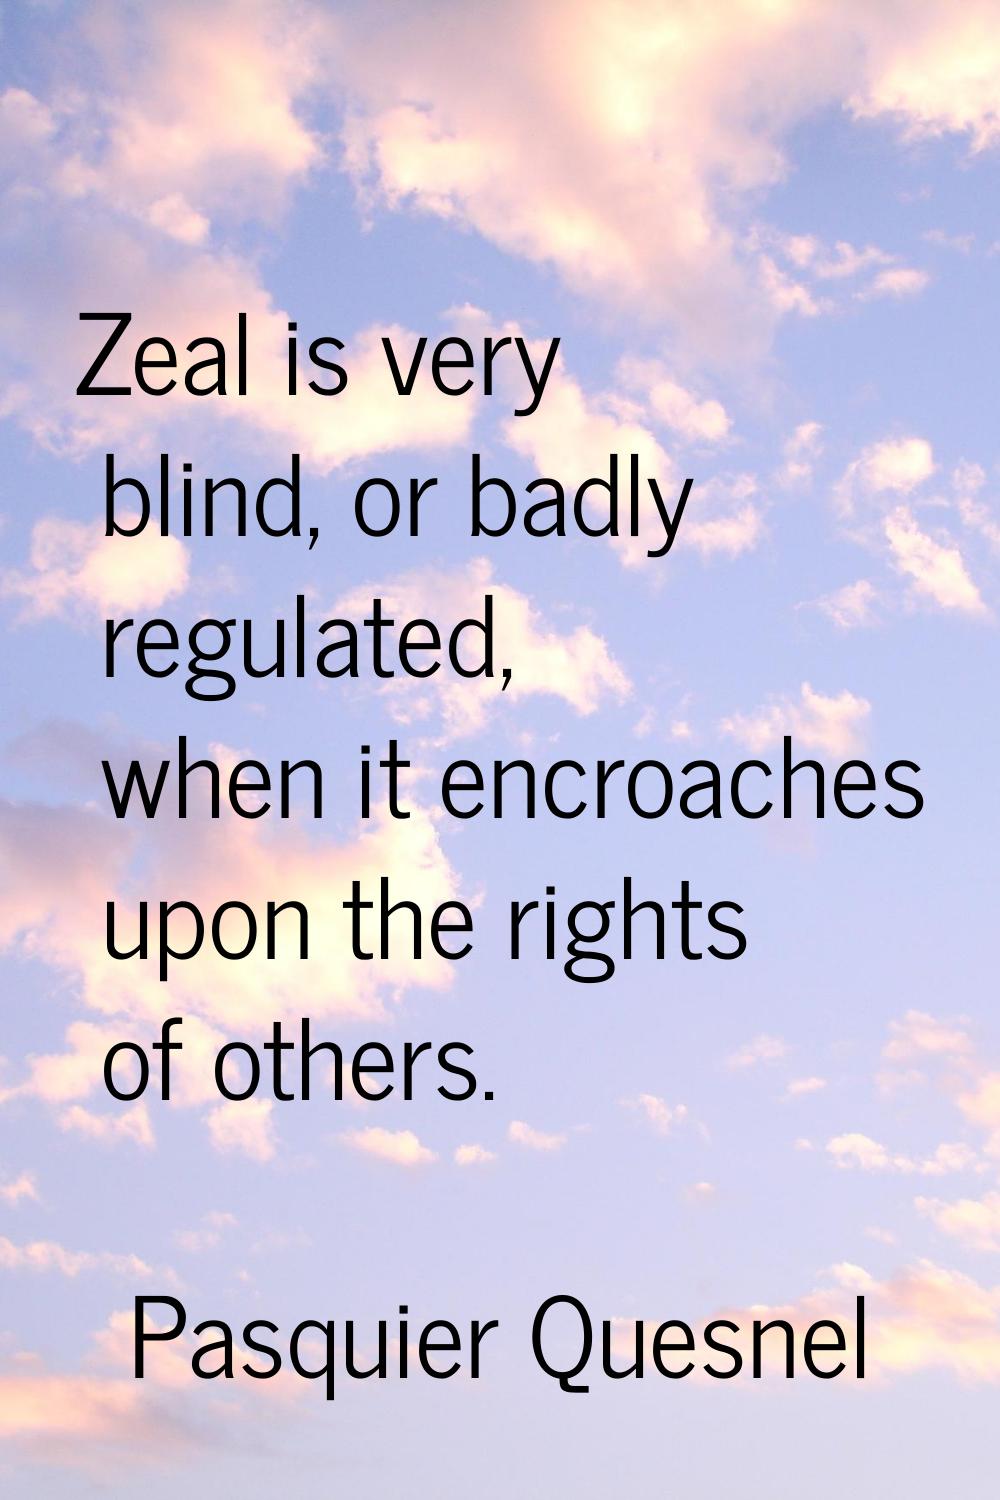 Zeal is very blind, or badly regulated, when it encroaches upon the rights of others.